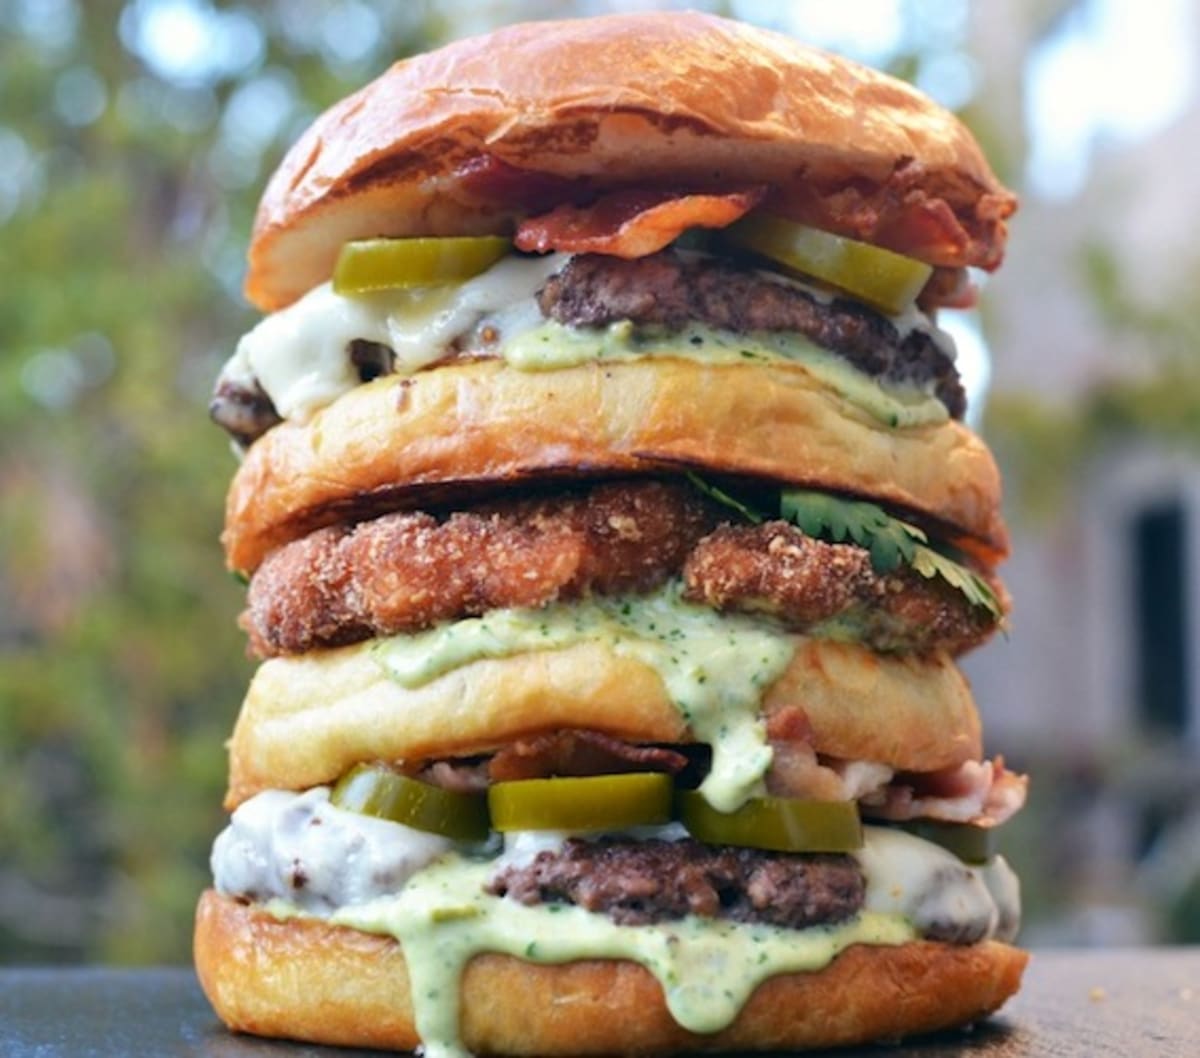 Meet The Mcconsensual Group Sex Burger Featuring Chicharrón Fried Chicken And Two Beef Patties 